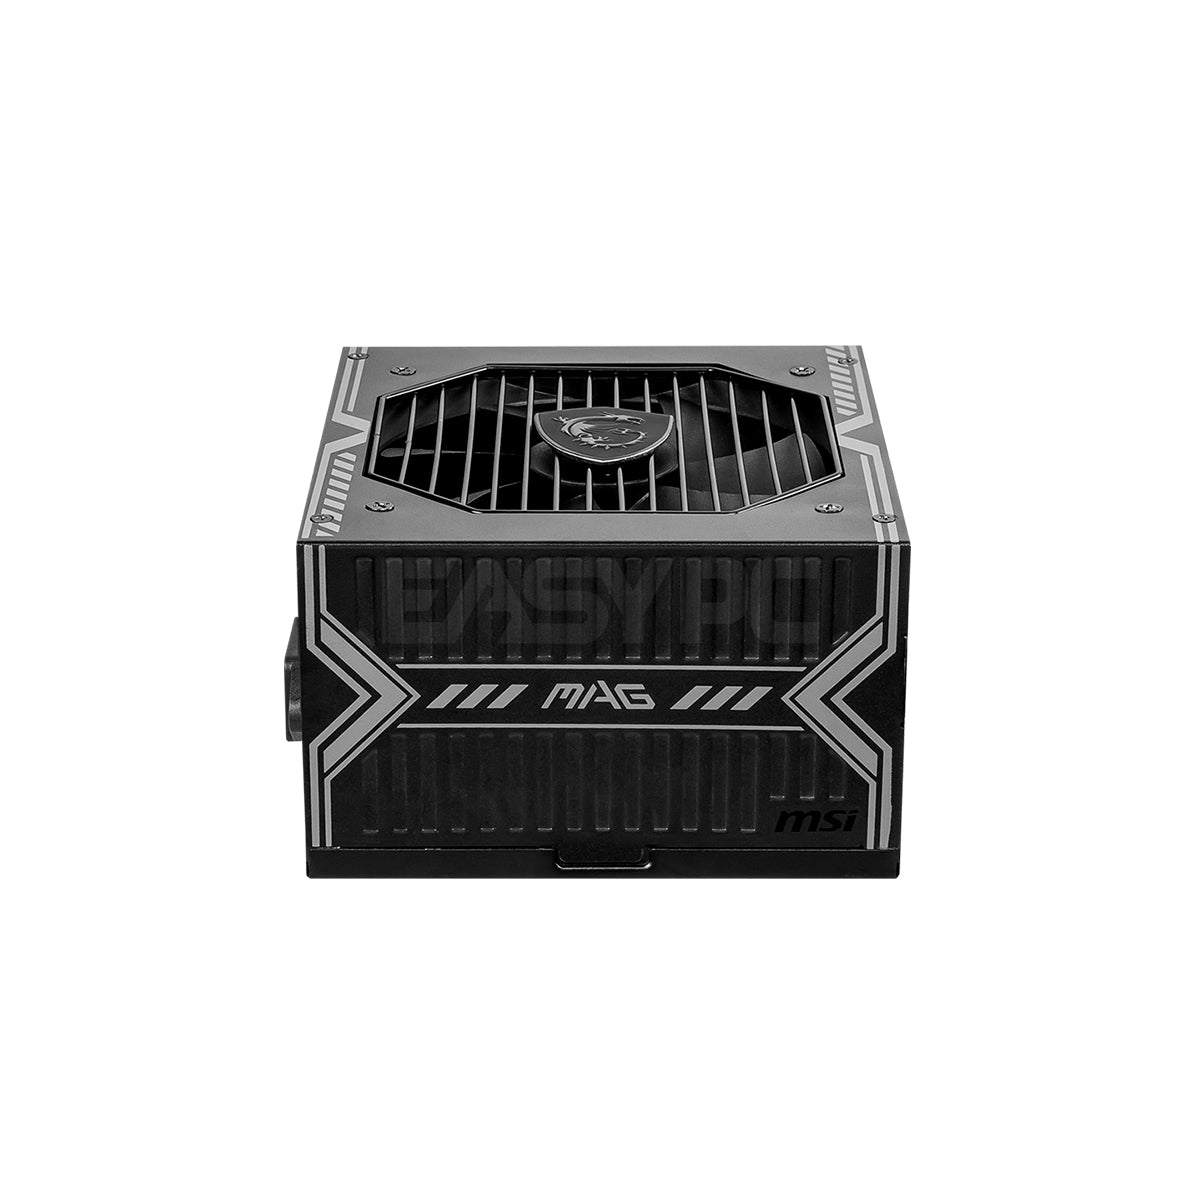 MSI MAG A650BN 650W Power Supply - MSI-US Official Store